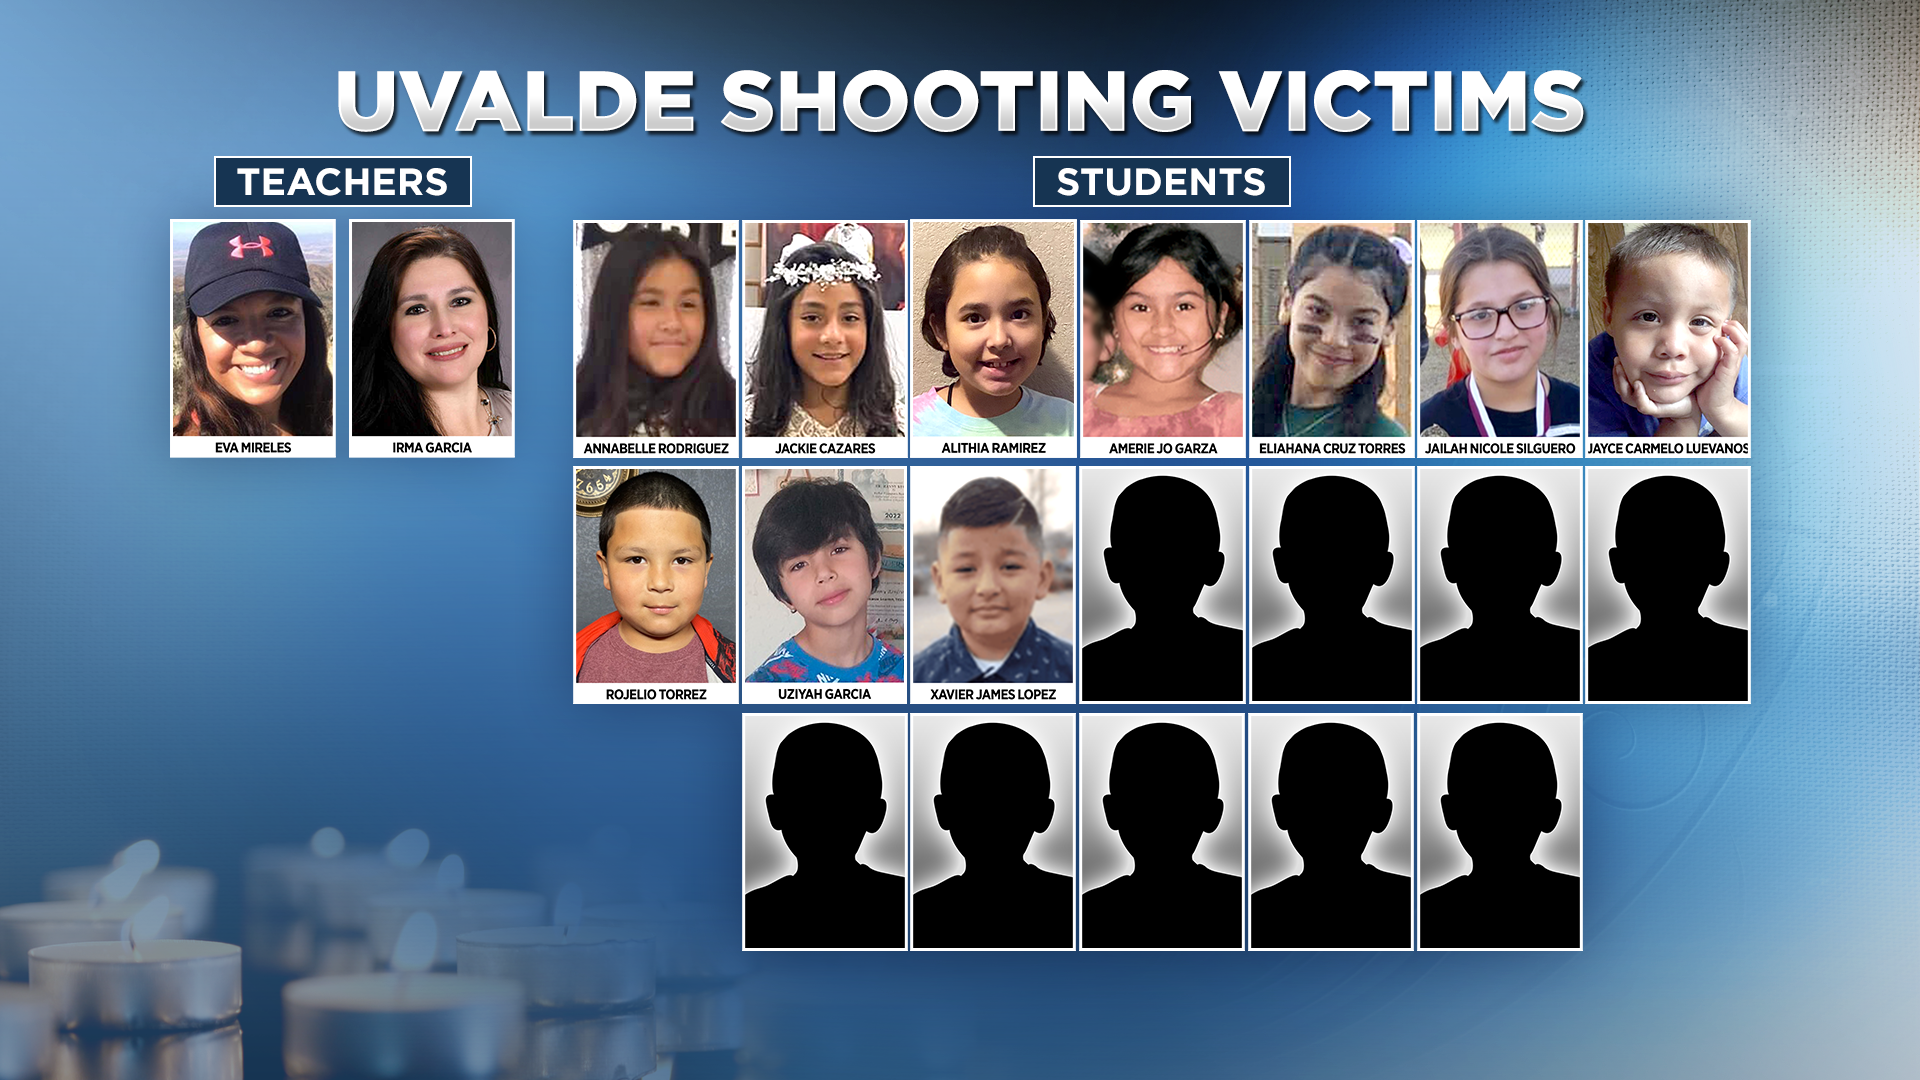 t_e4cd78fc438242cf9e2b23ac3e8a431a_name_Uvalde_School_Shooting_Victims.png